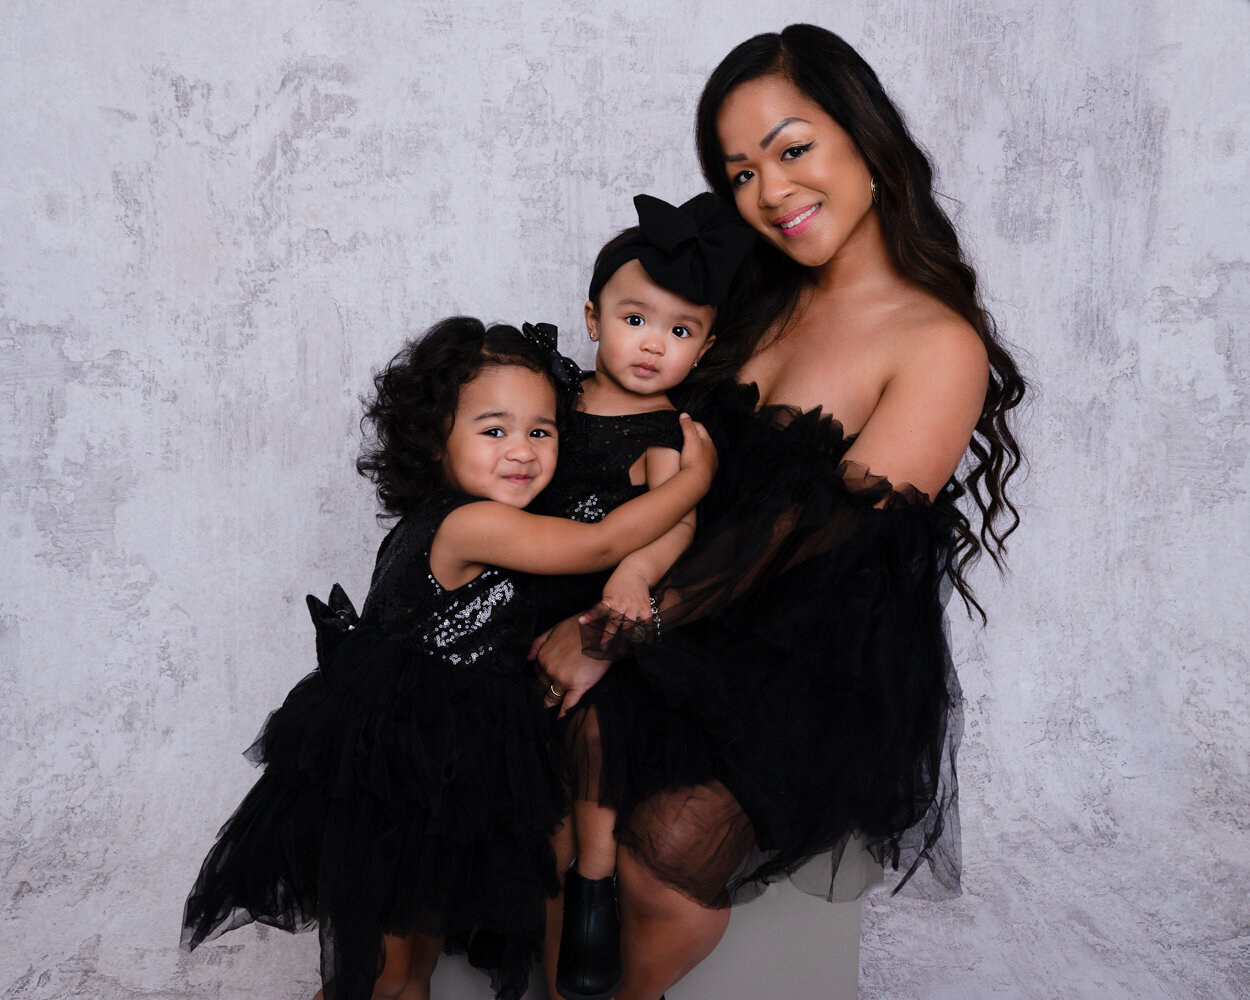 South_River_NJ_First_Birthday_Mommy_and_Us_Black_Dresses (2)